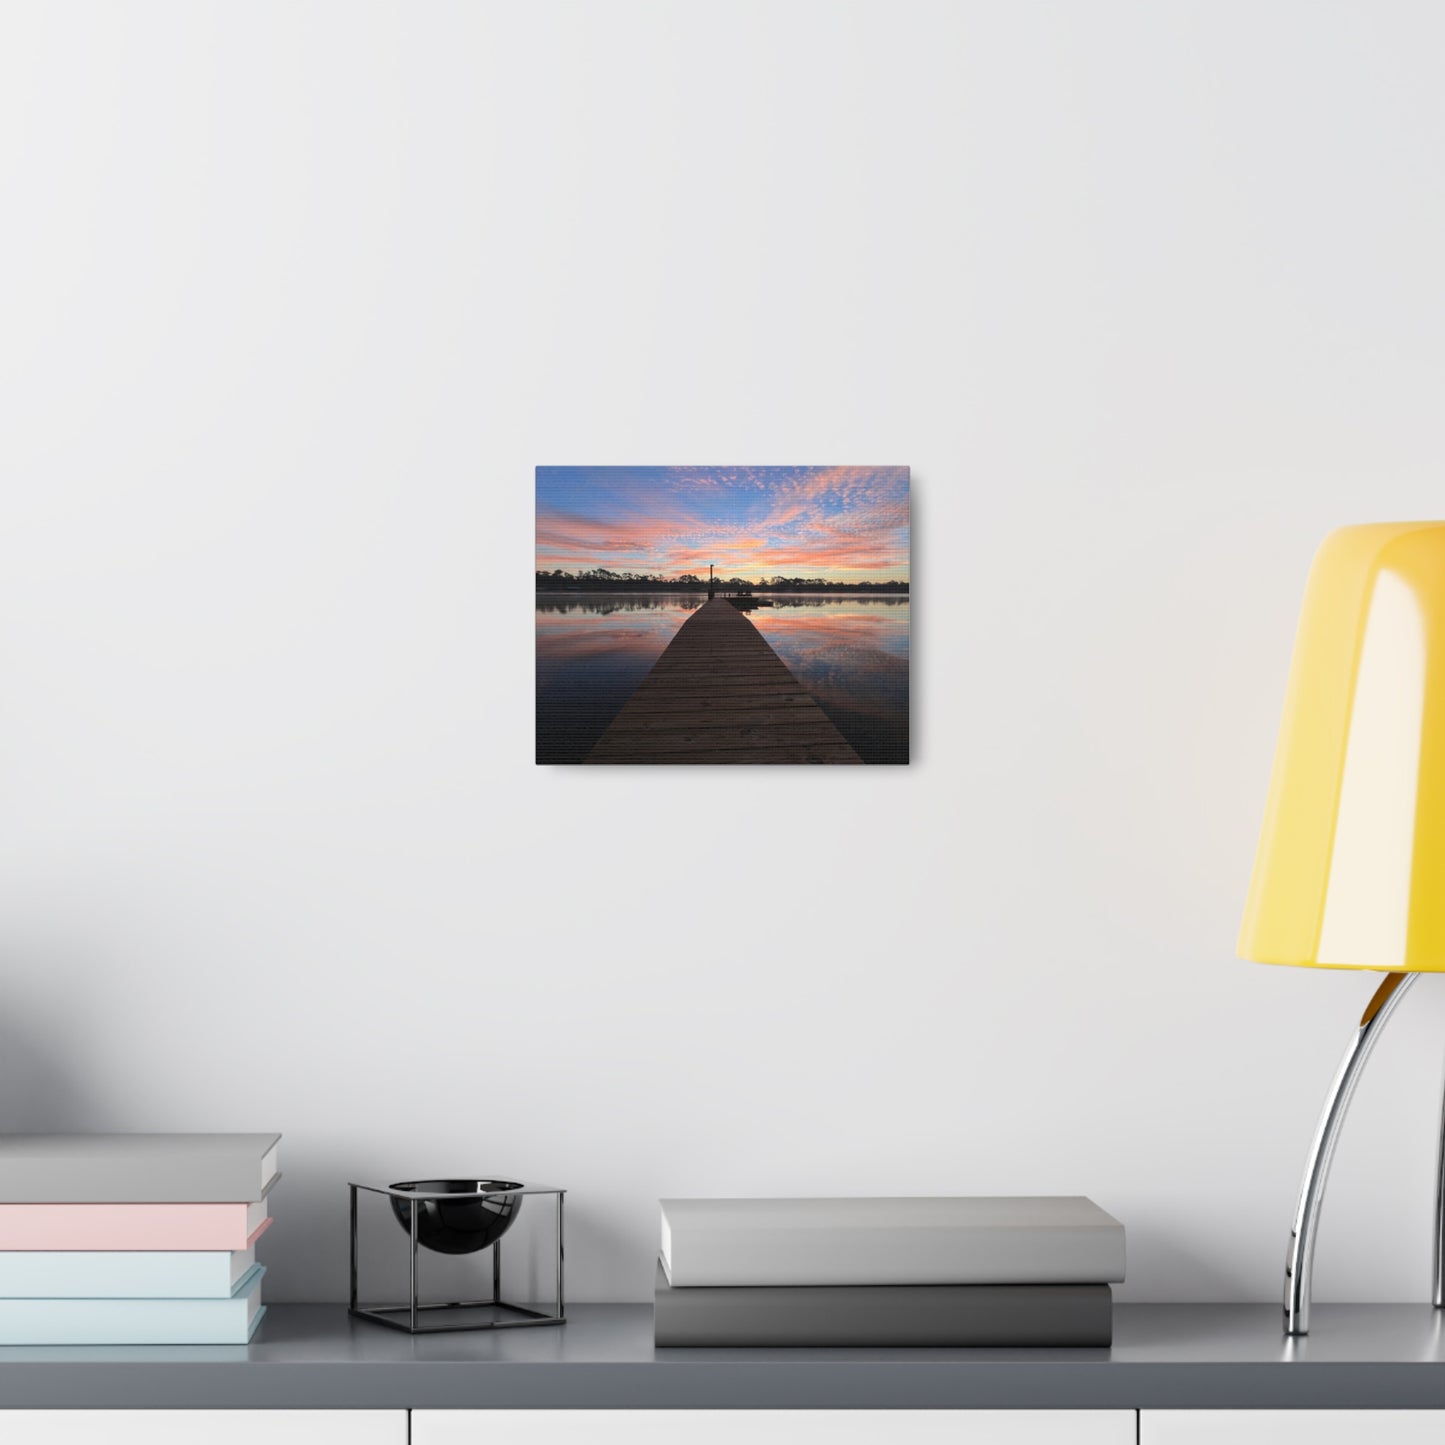 Water Dock Sunset View - Canvas